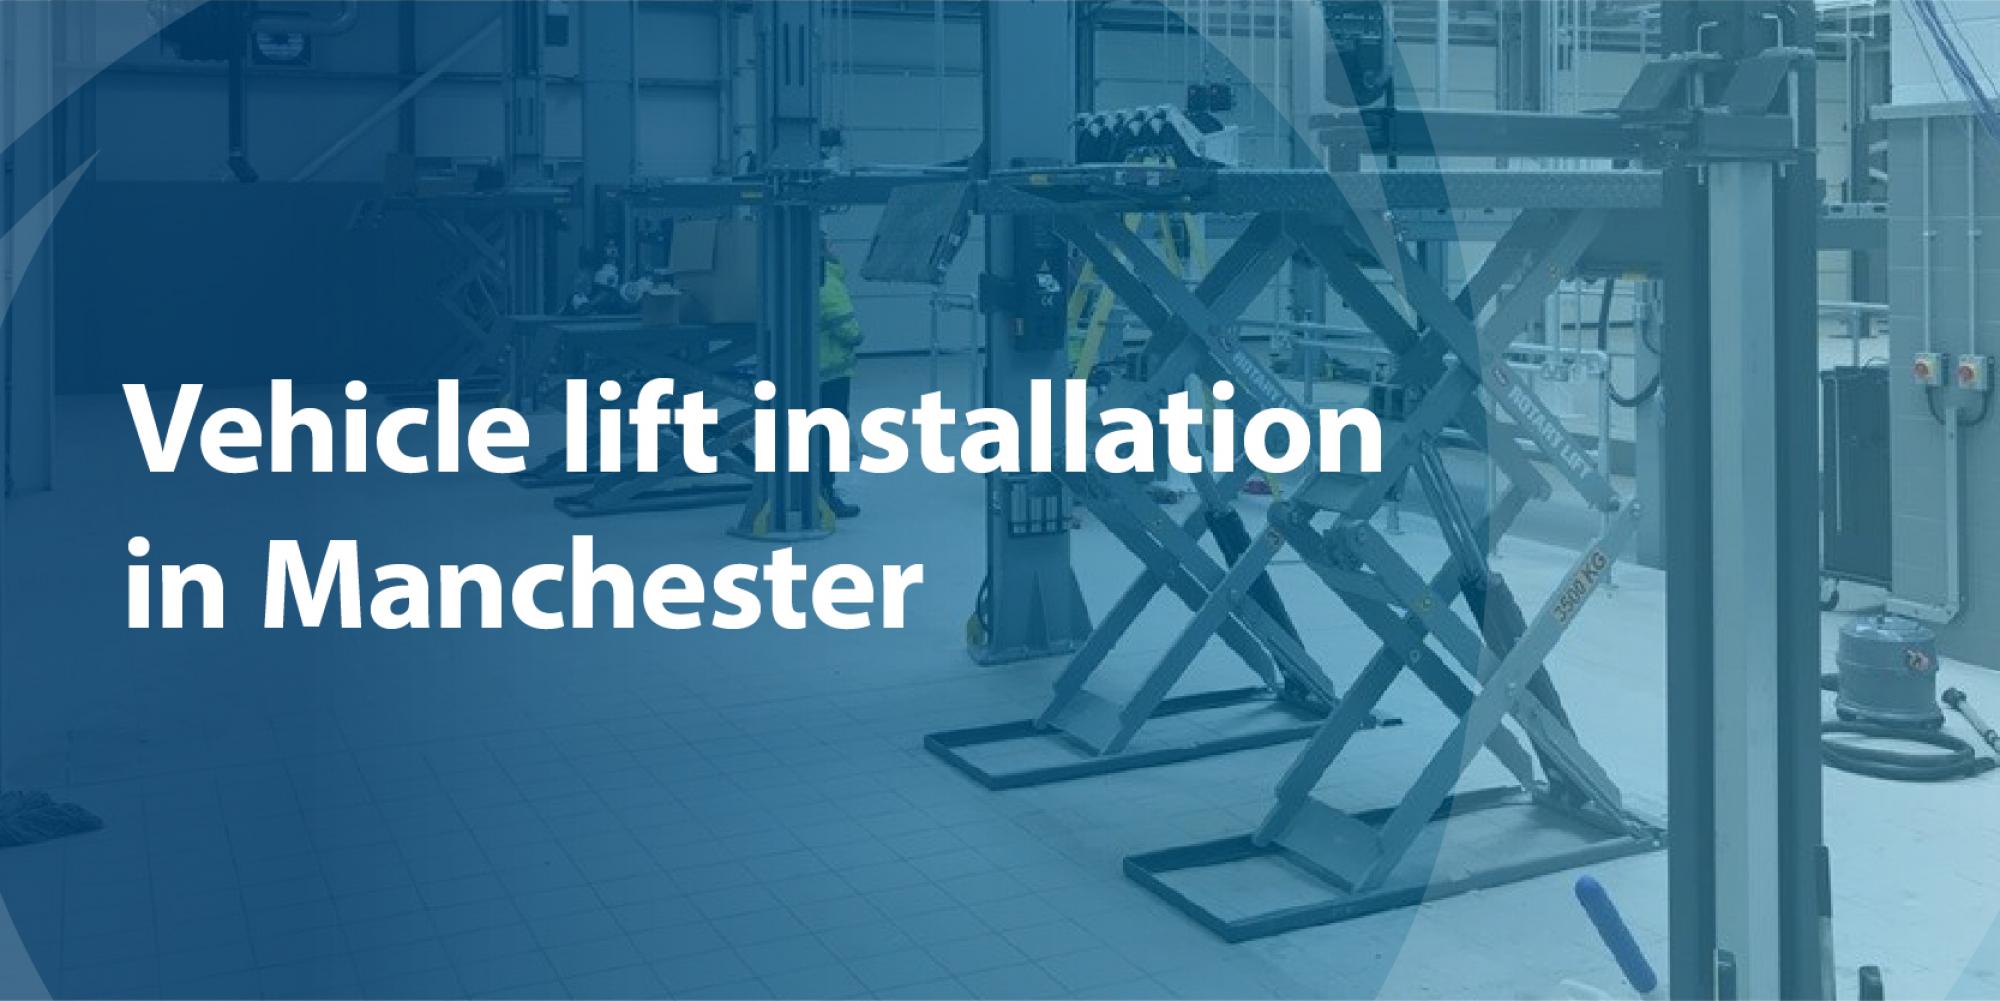 Professional vehicle lift installation in Manchester for commercial & car workshops by CCS Garage Equipment